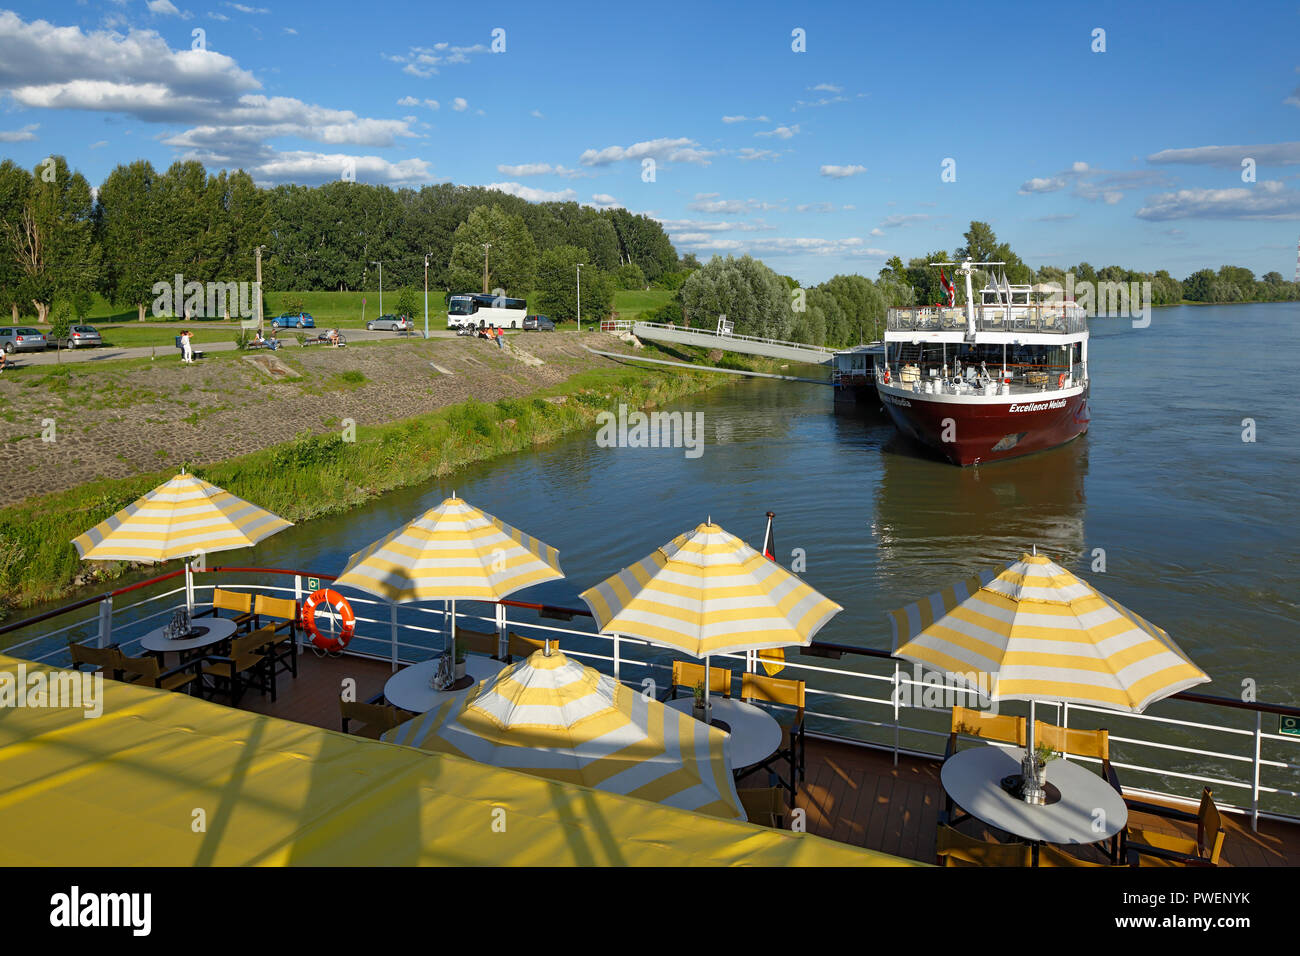 tourism, holiday, freetime, Danube river cruise, Danube navigation, cruisers Excellence Melodia and aROSA cruiser Mia, open afterdeck, dishes and sunshades, Danube landscape, river landscape, shipping pier in Kalocsa, Hungary, Southern Hungary, Pannonian Plain, Southern Great Hungarian Plain, Bacs-Kiskun County Stock Photo